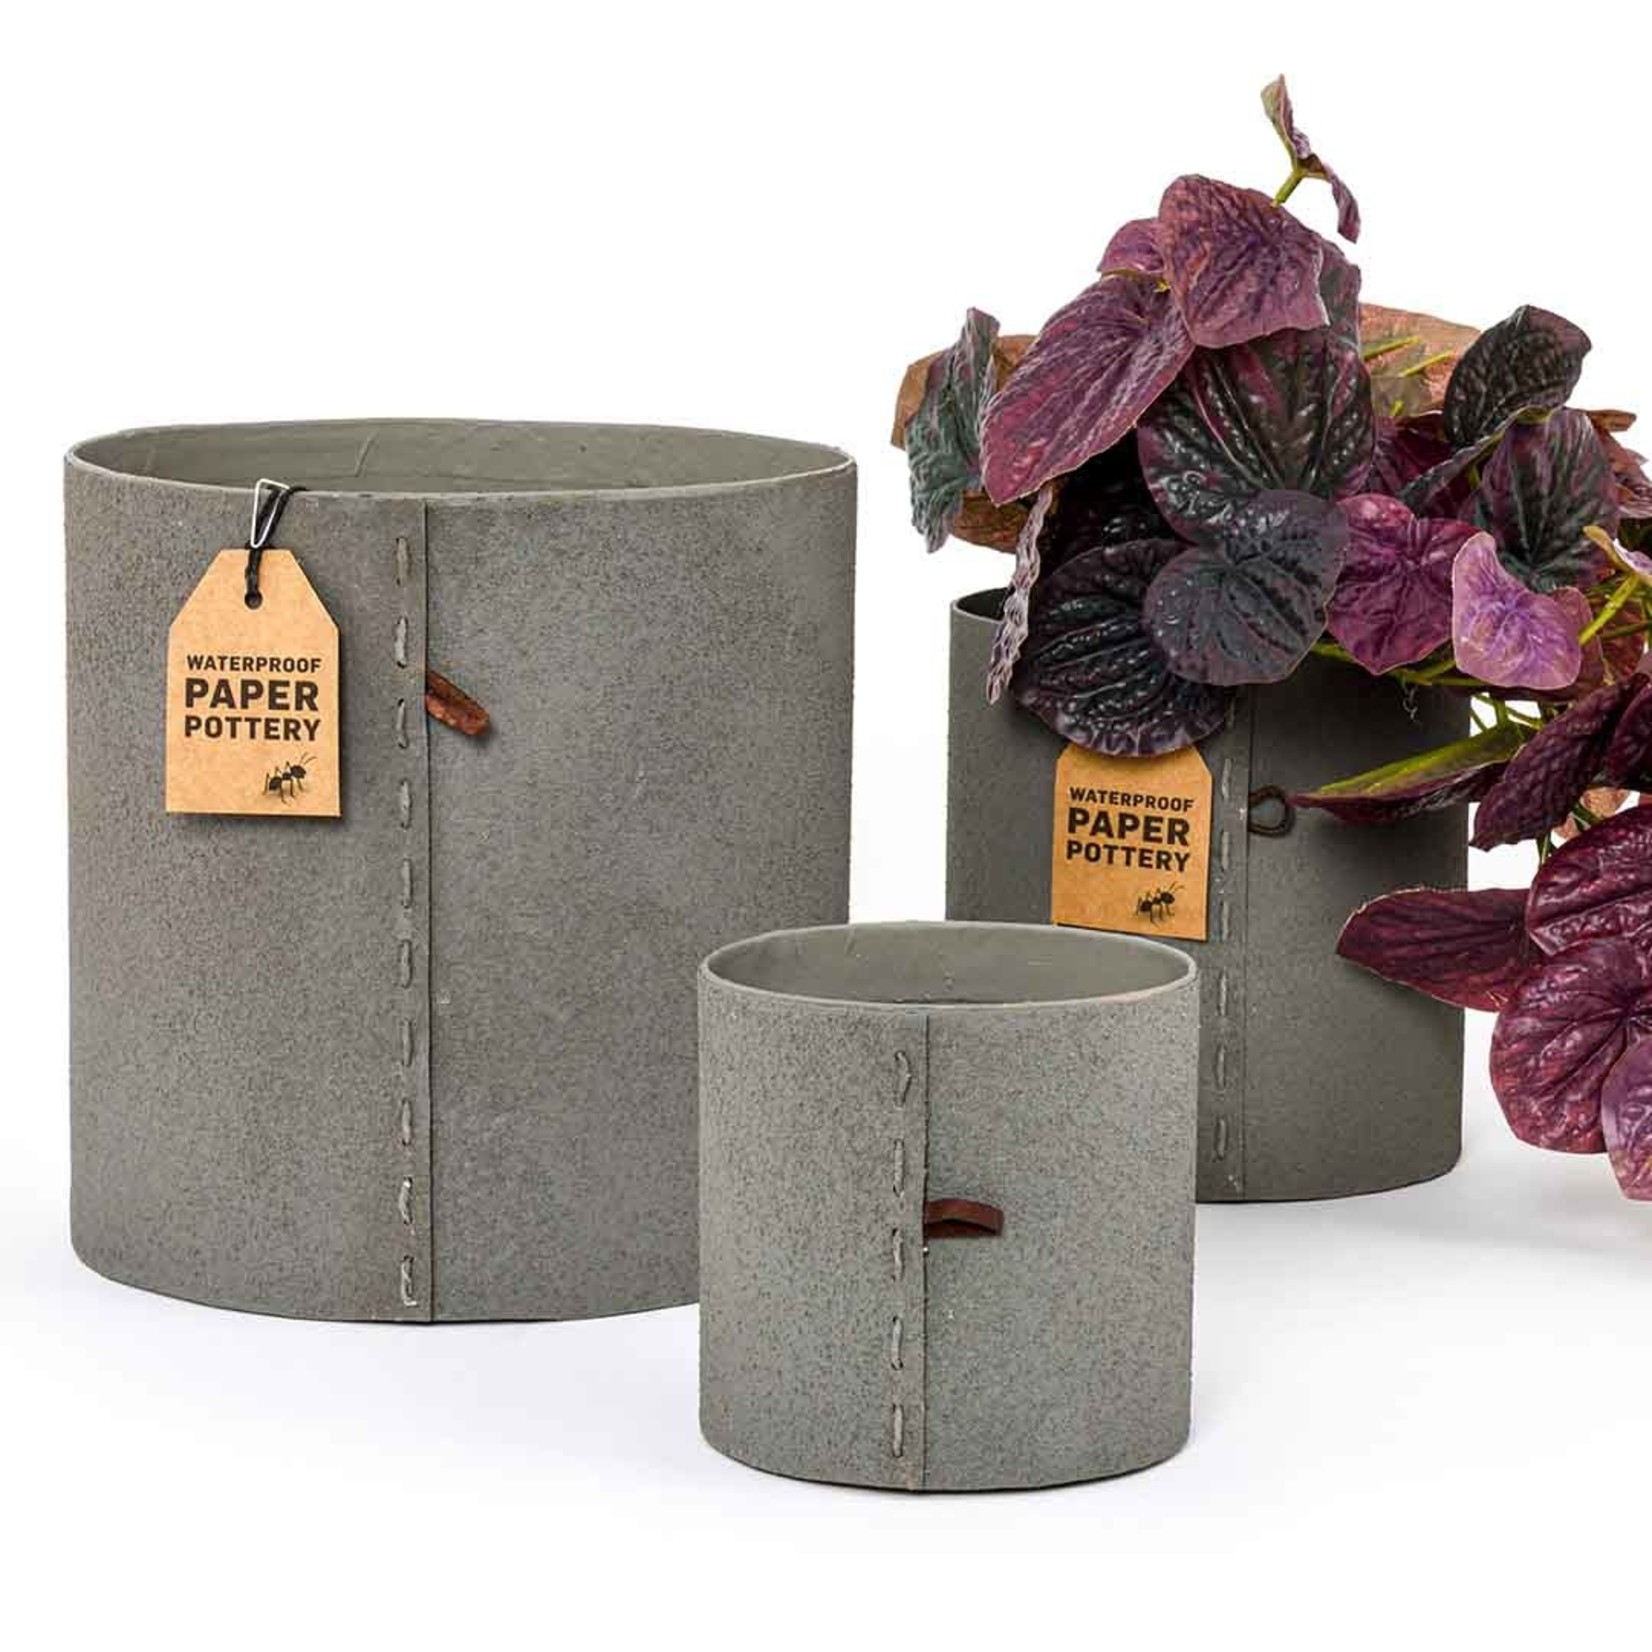 Waterproof Paper Pottery Airlie Pot Stone Large